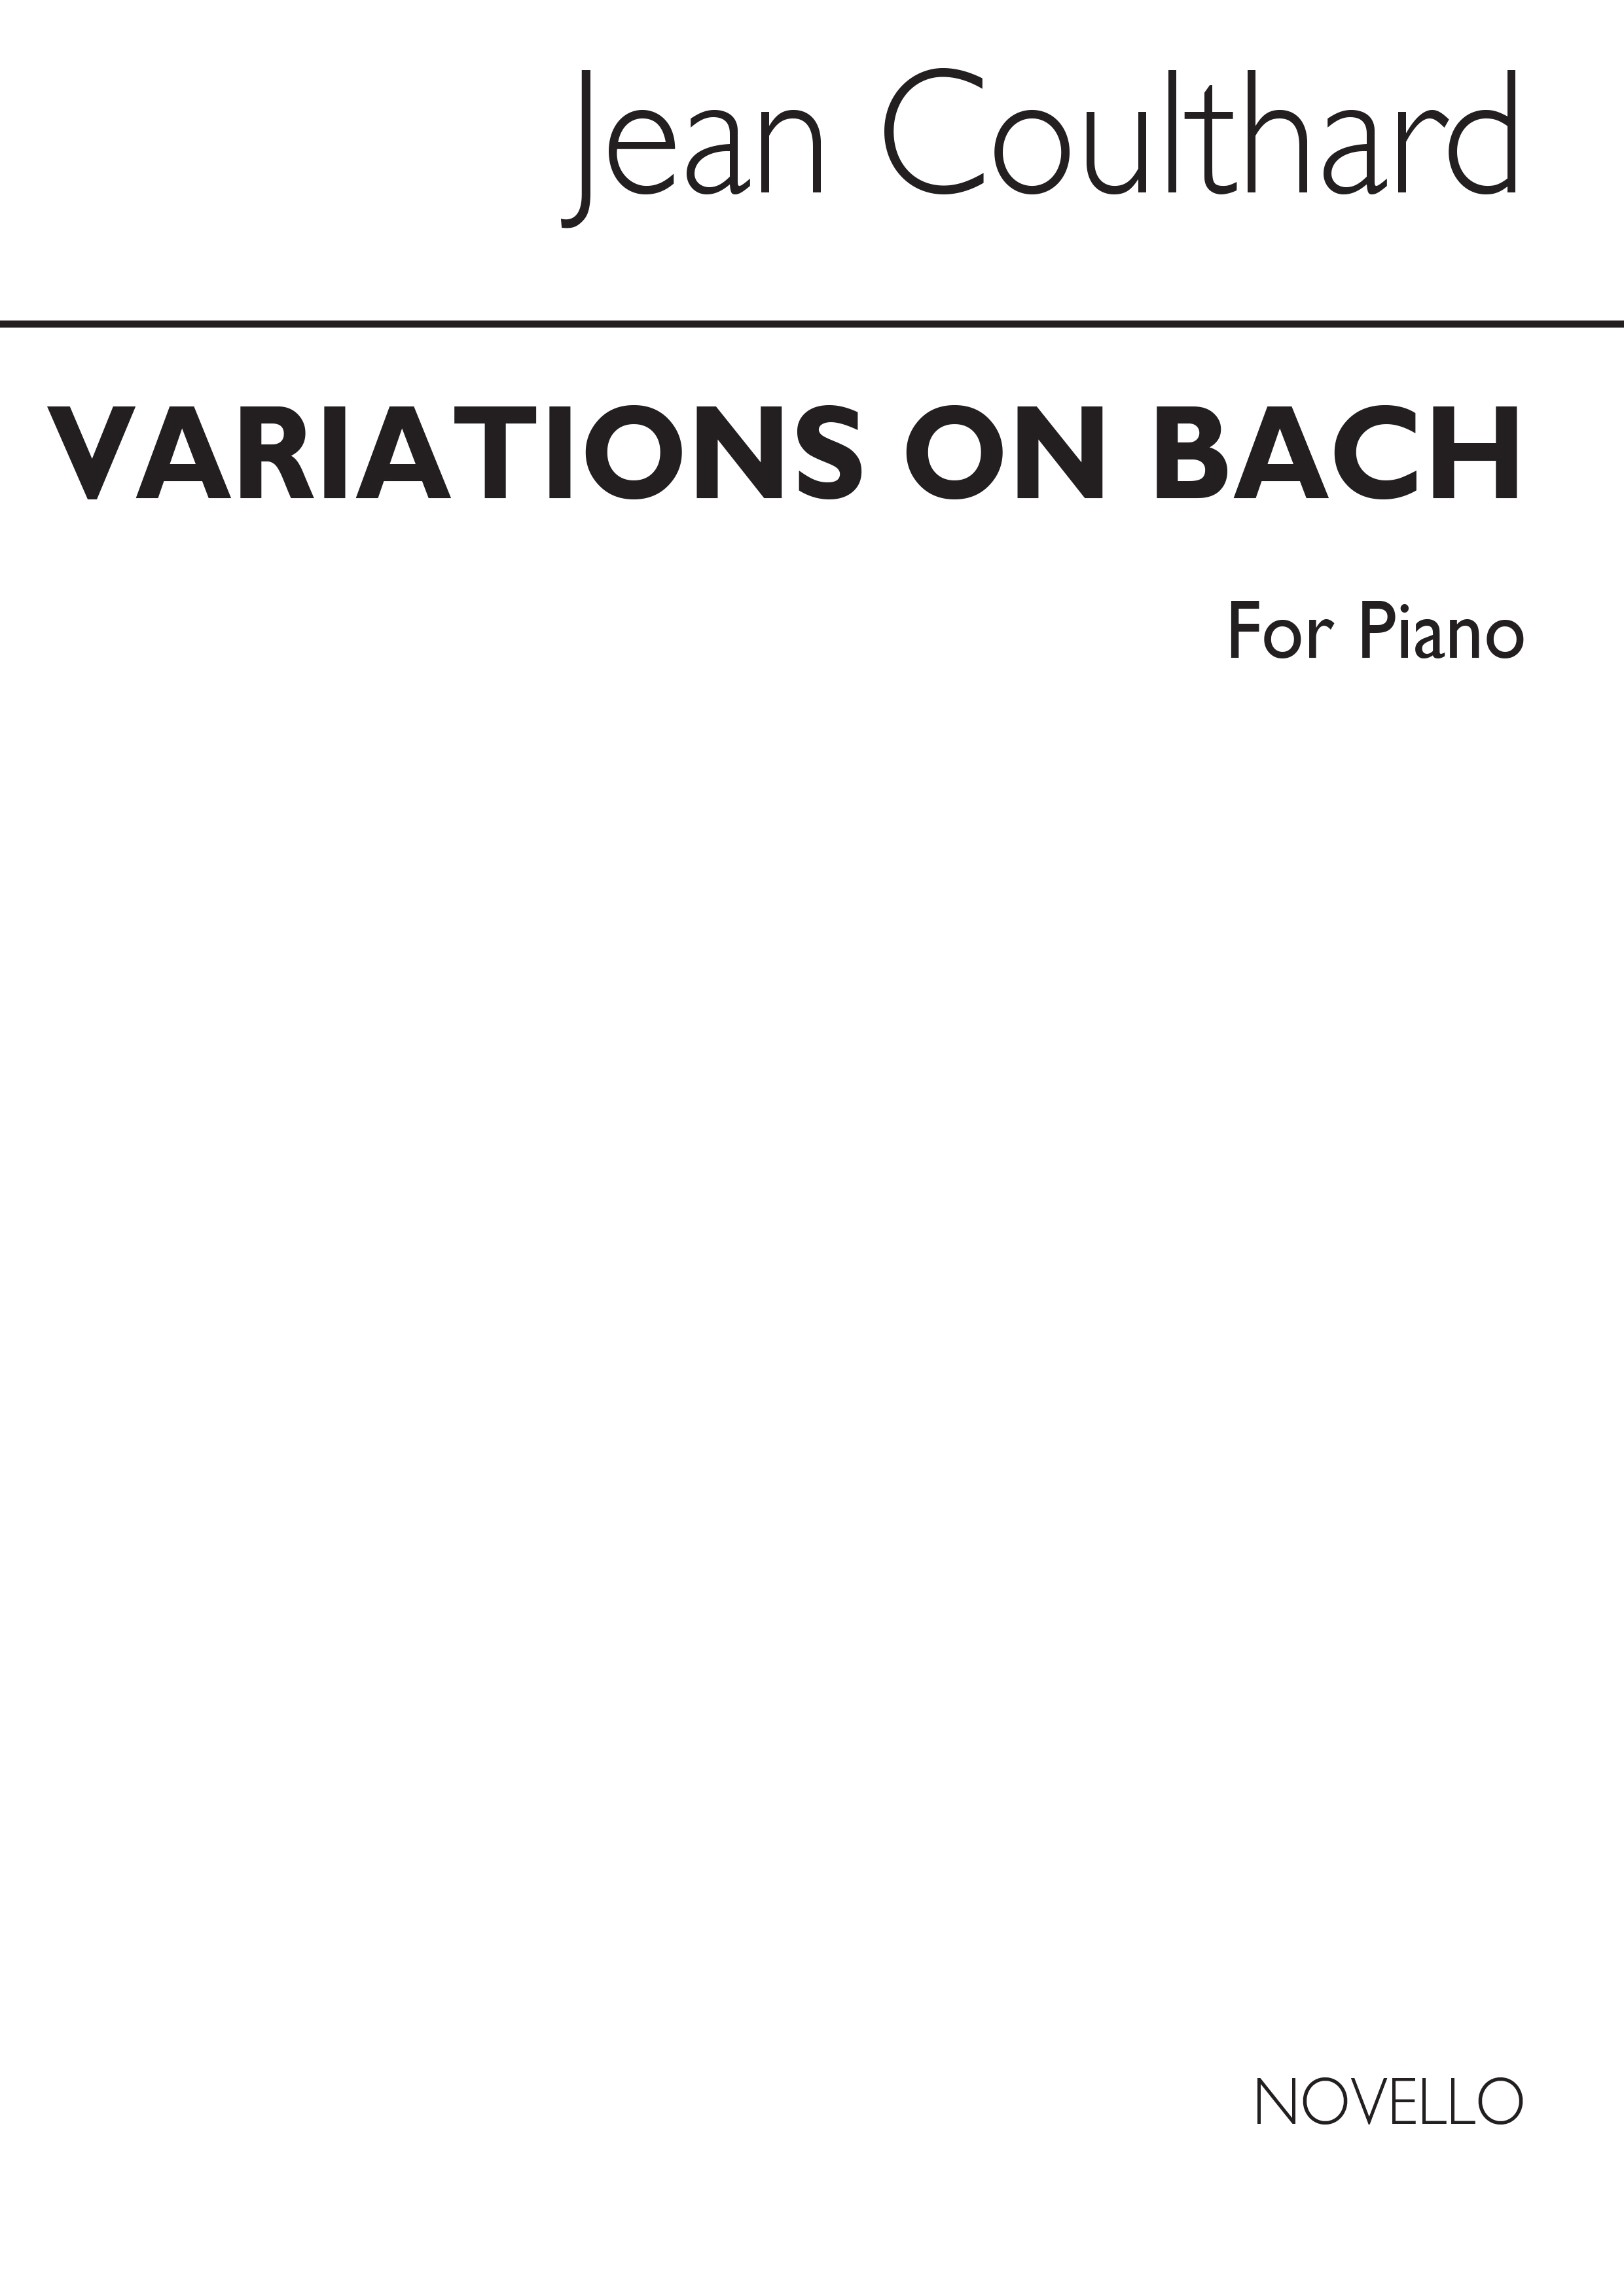 Coulthard: Variations On Bach for Piano